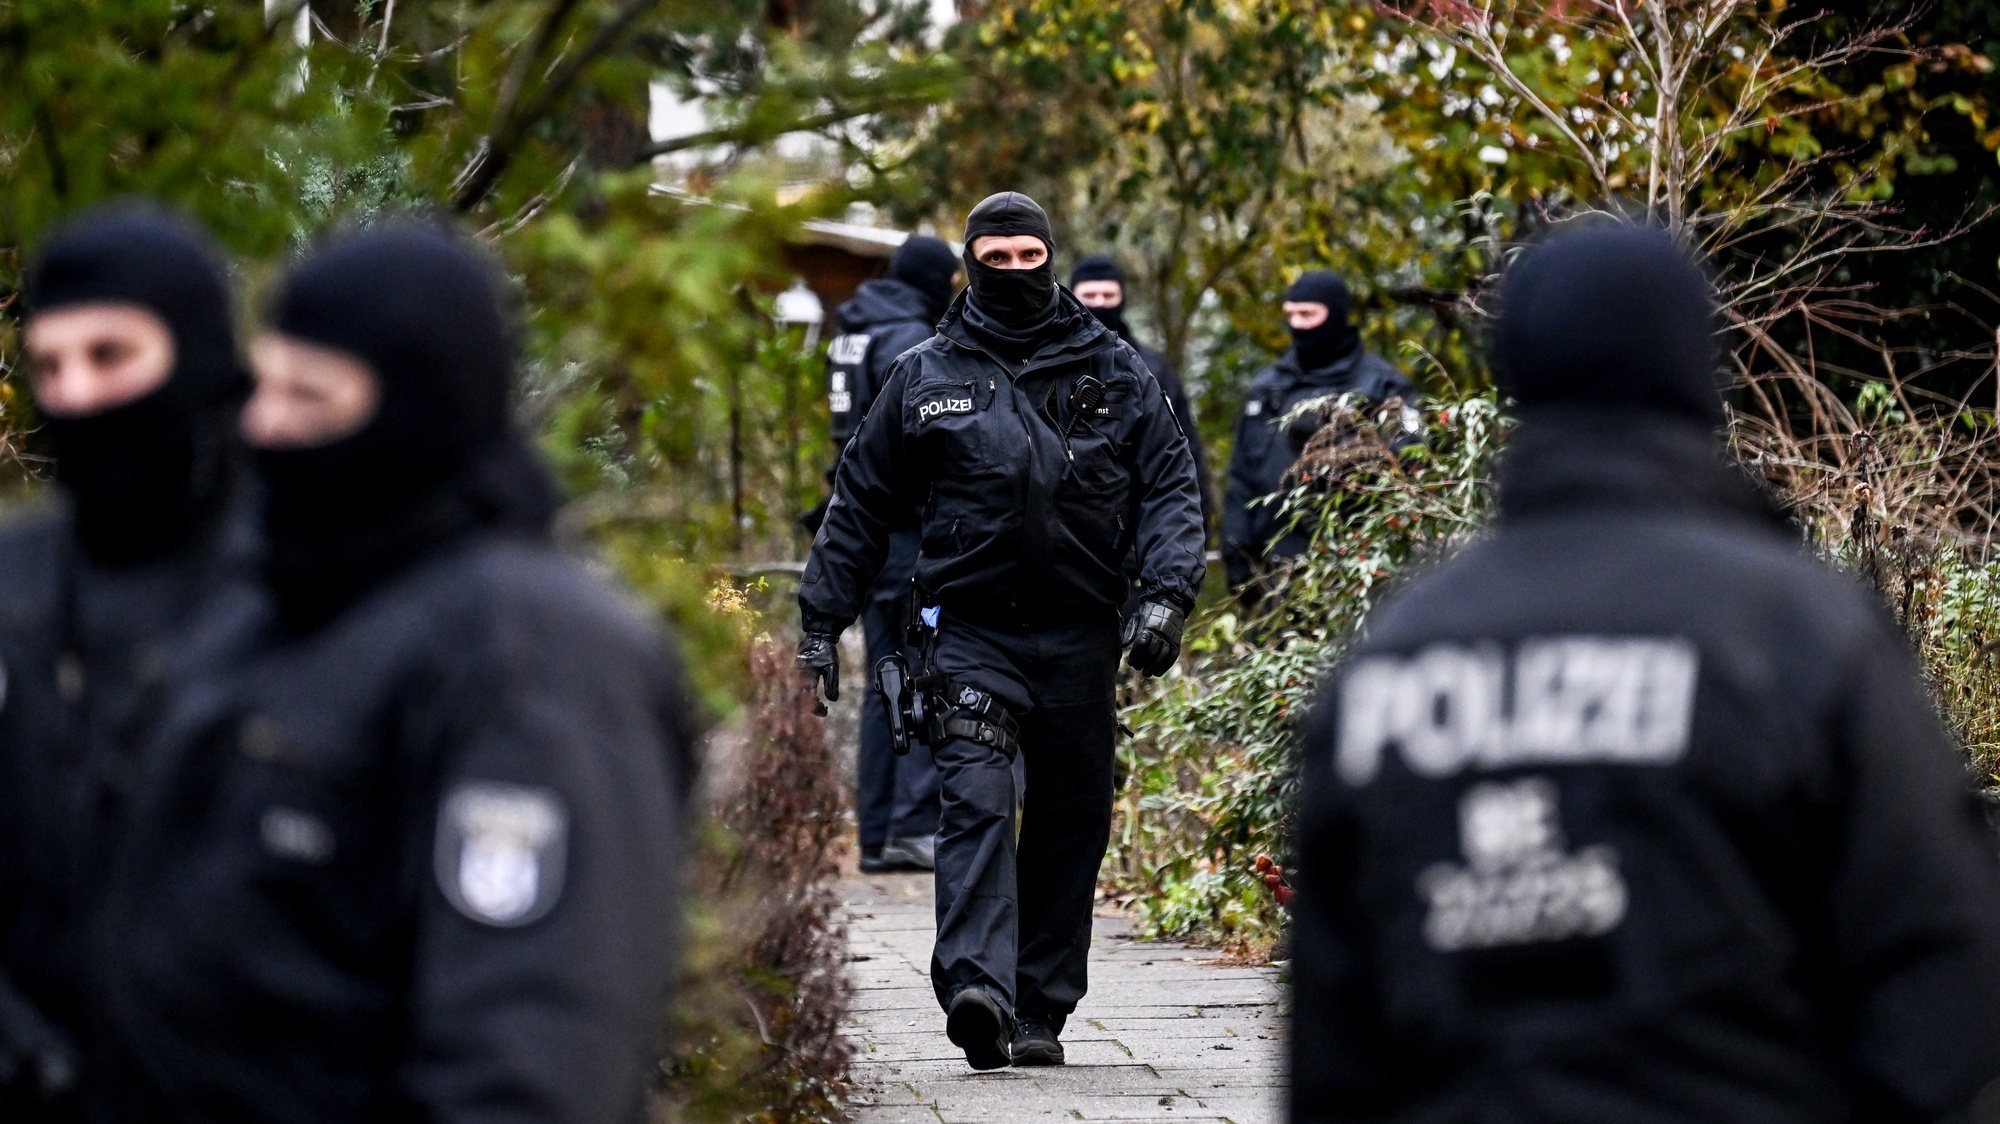 epa10353400 Police officers work during a raid in Berlin, Germany, 07 December 2022. Twenty-five people allegedly affiliated to the so-called Reichs Citizens (Reichsbuerger) movement were arrested in raids across Germany on suspicion of plotting to overthrow the government, a spokesperson for the Federal Prosecutor&#039;s office said. A group of far-right and ex-military figures are suspected to have planned to storm the parliament building, the Reichstag, and seize power.  EPA/FILIP SINGER